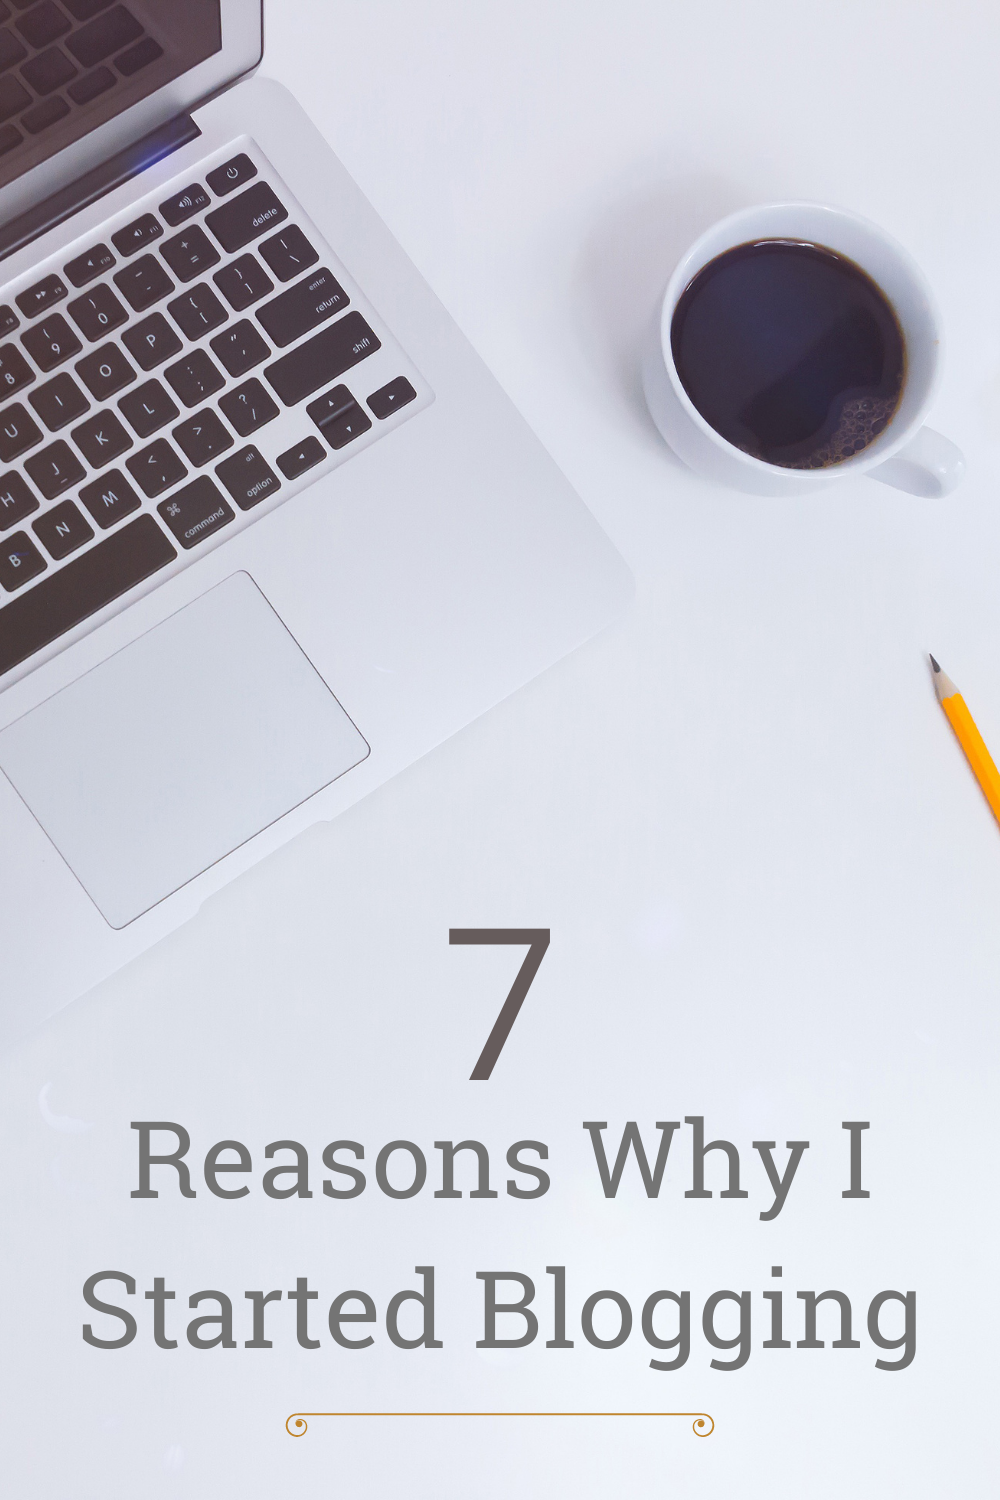 7 Reasons why I started blogging